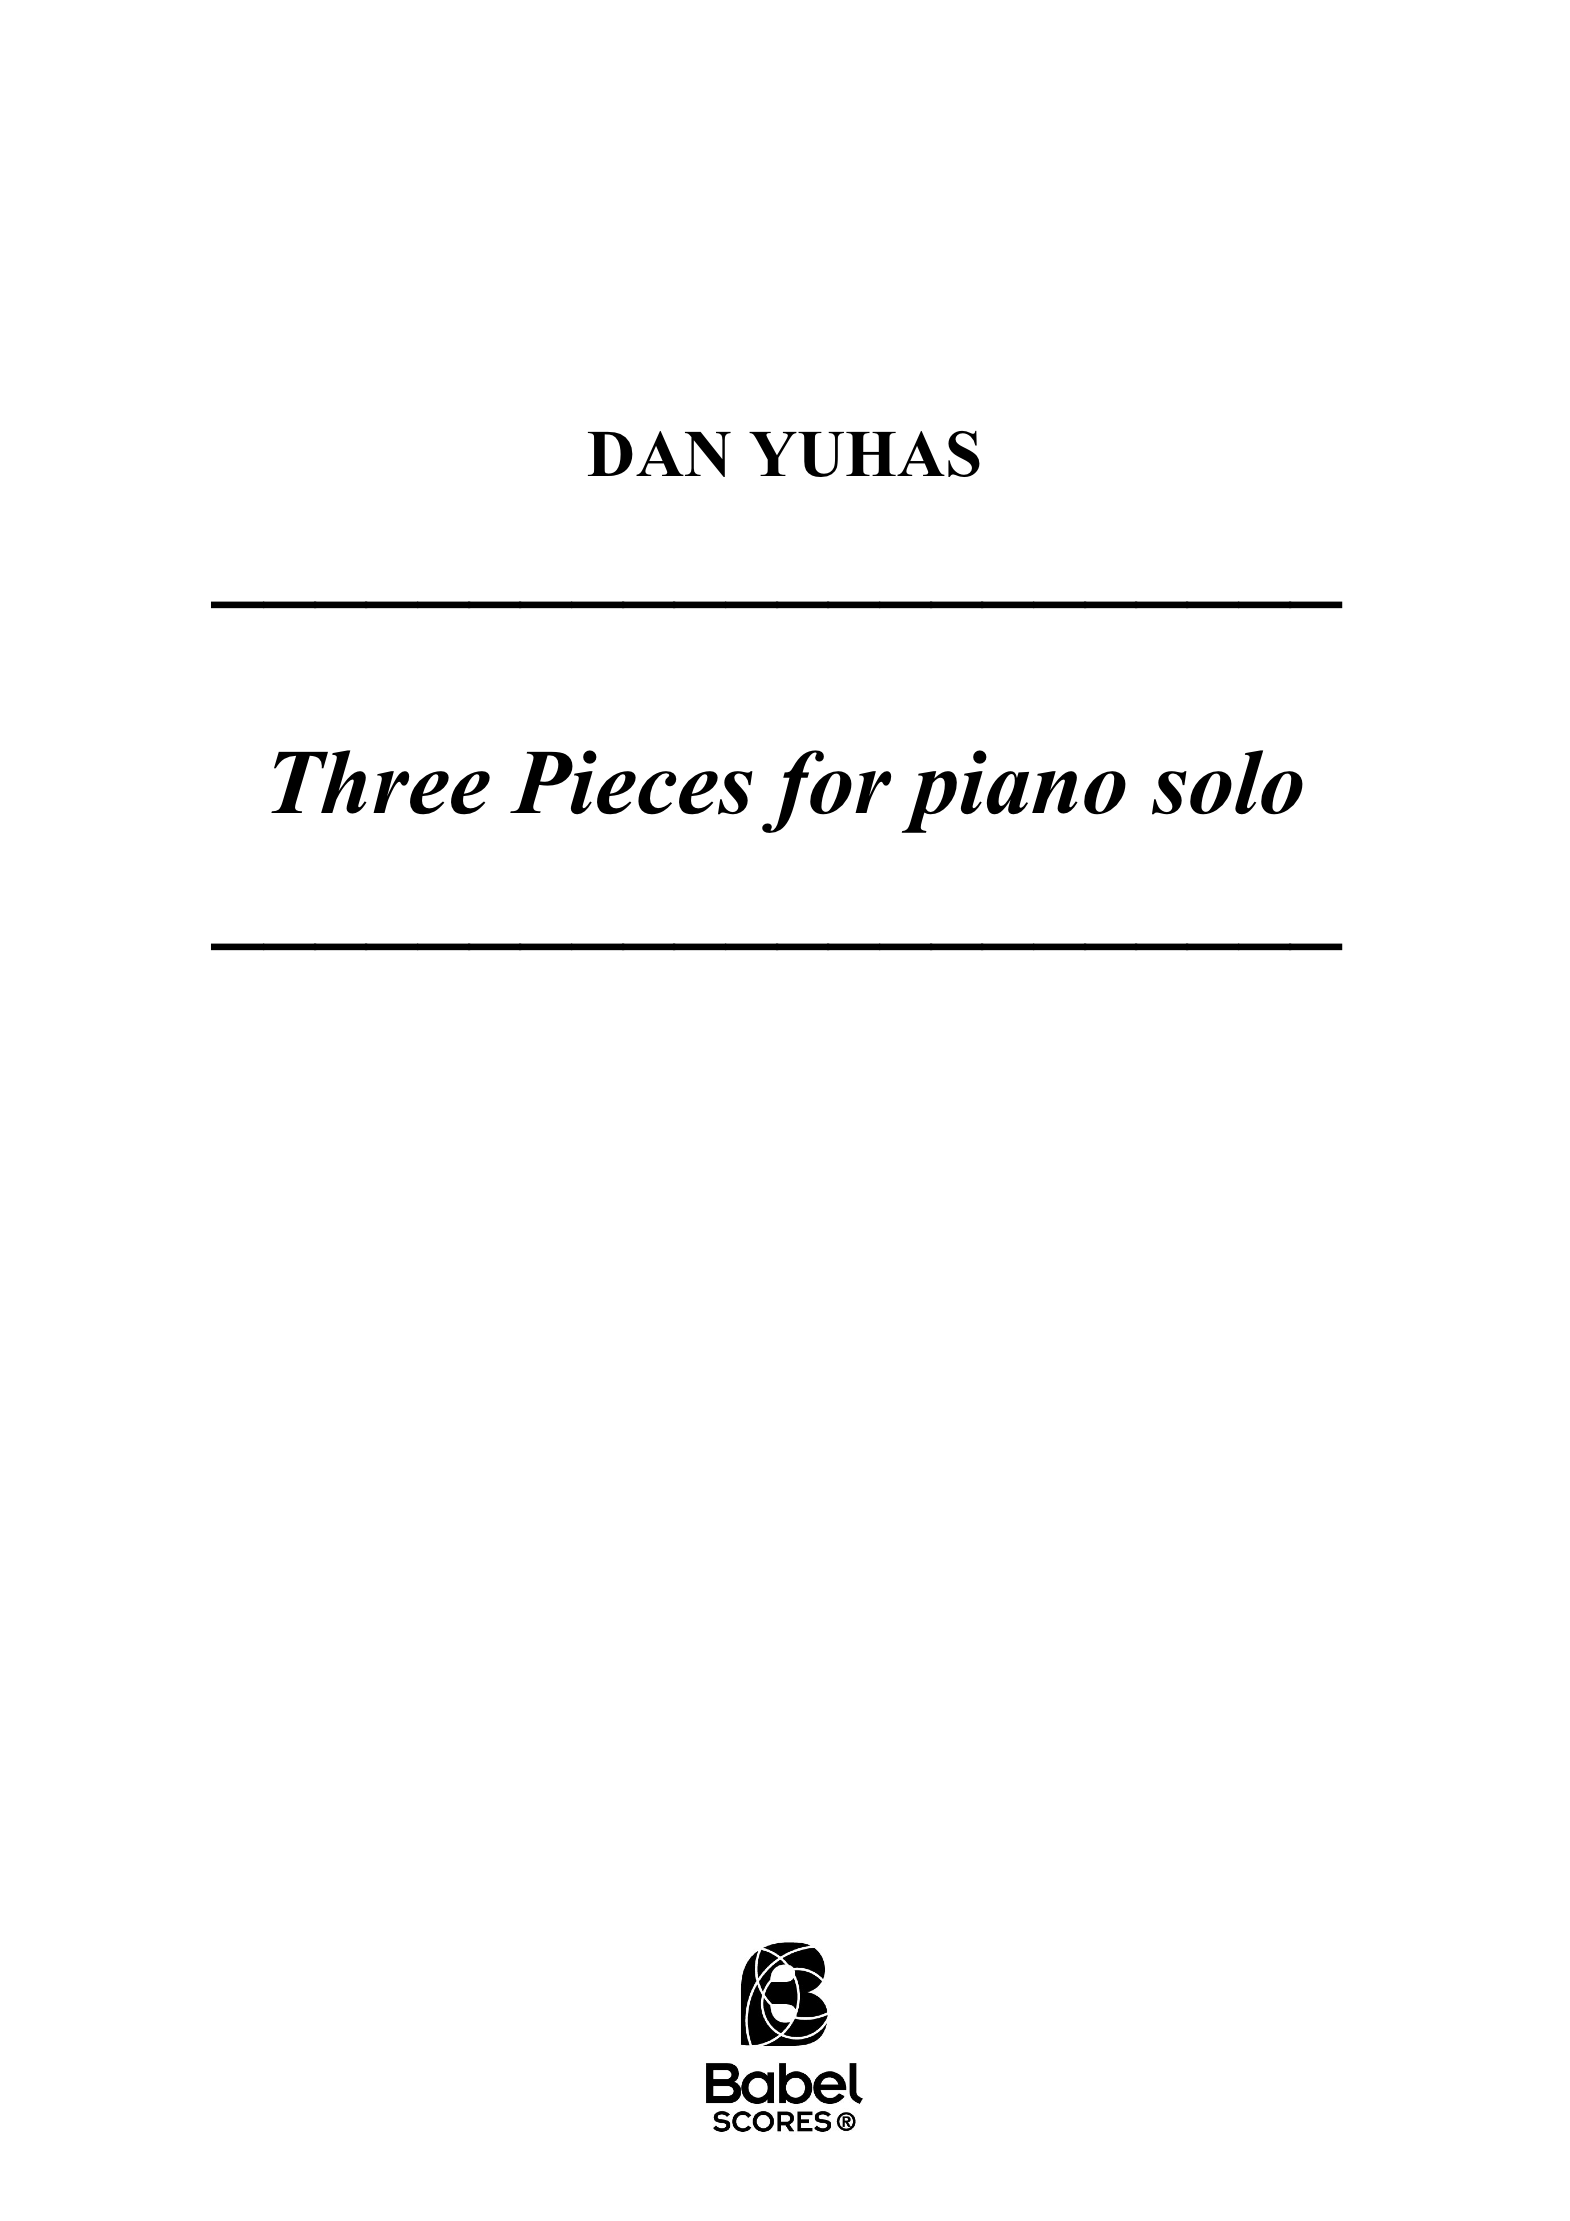 Dan Yuhas 3 pieces for piano solo A4 z